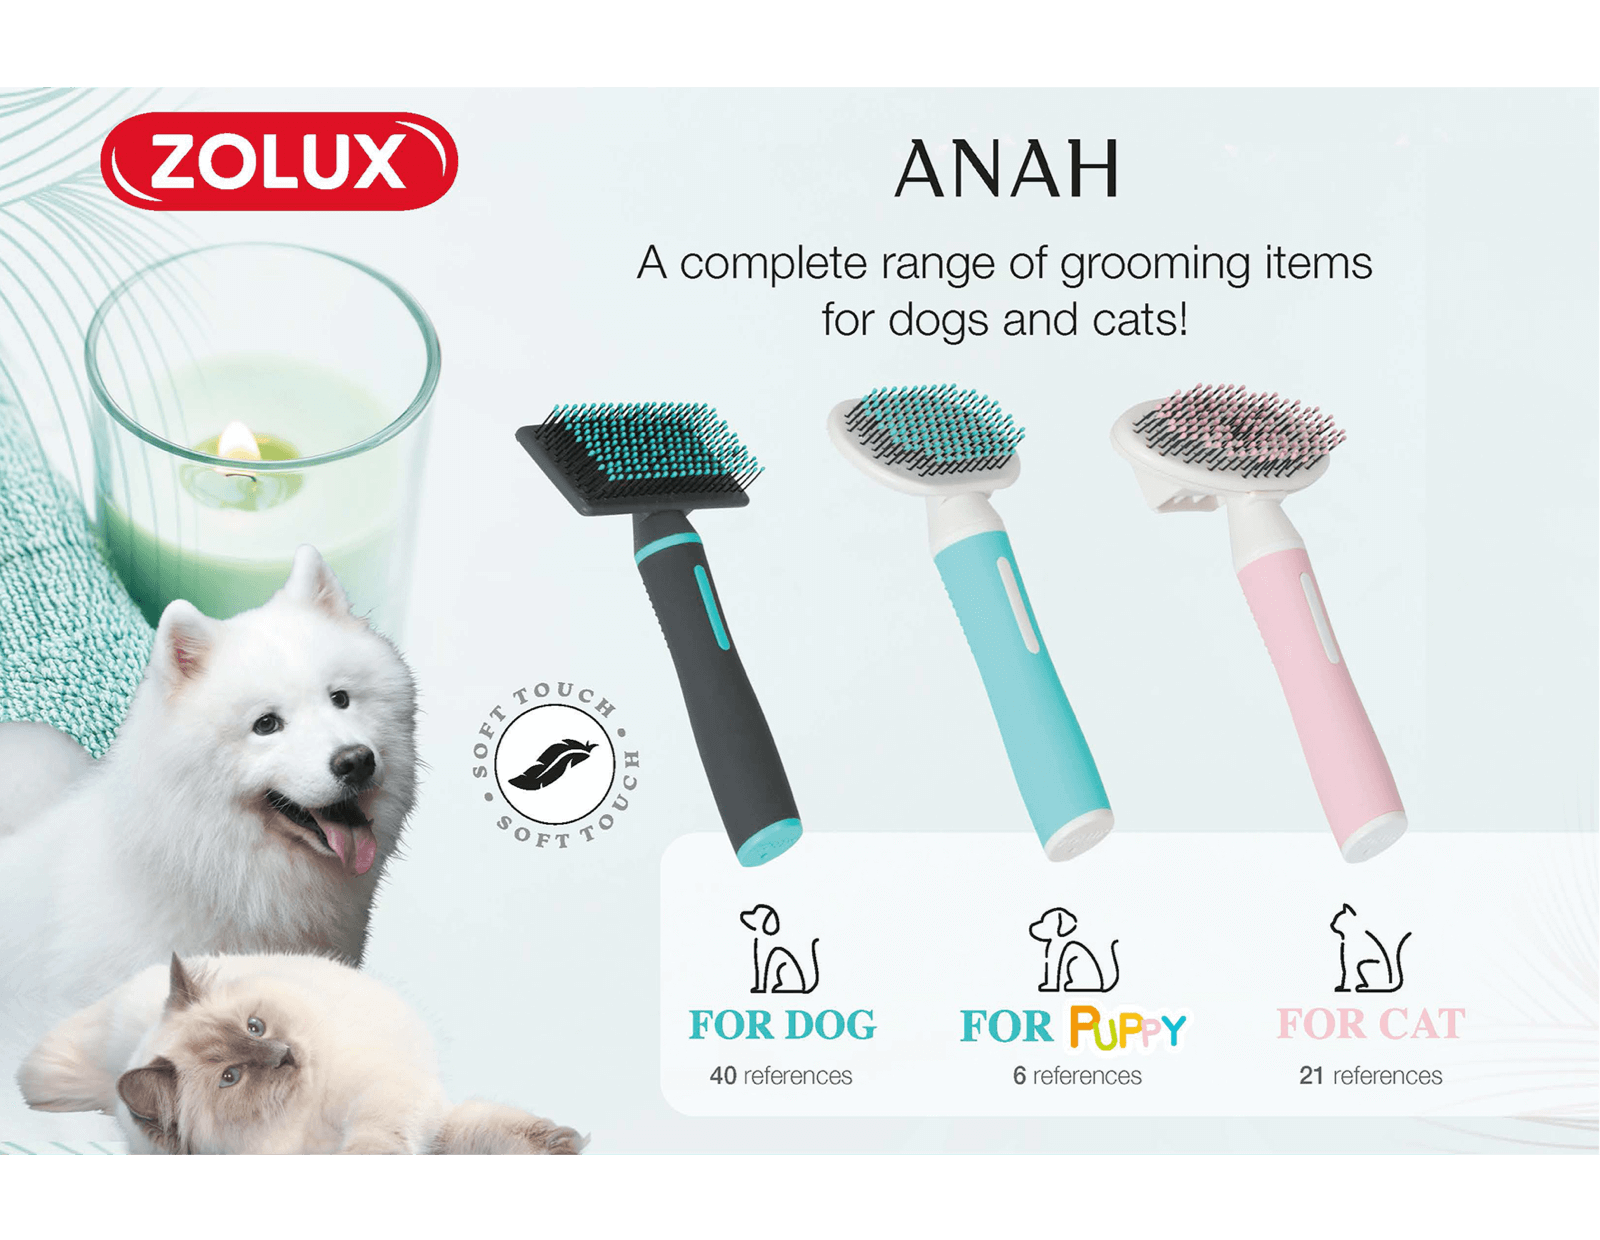 ANAH Grooming items